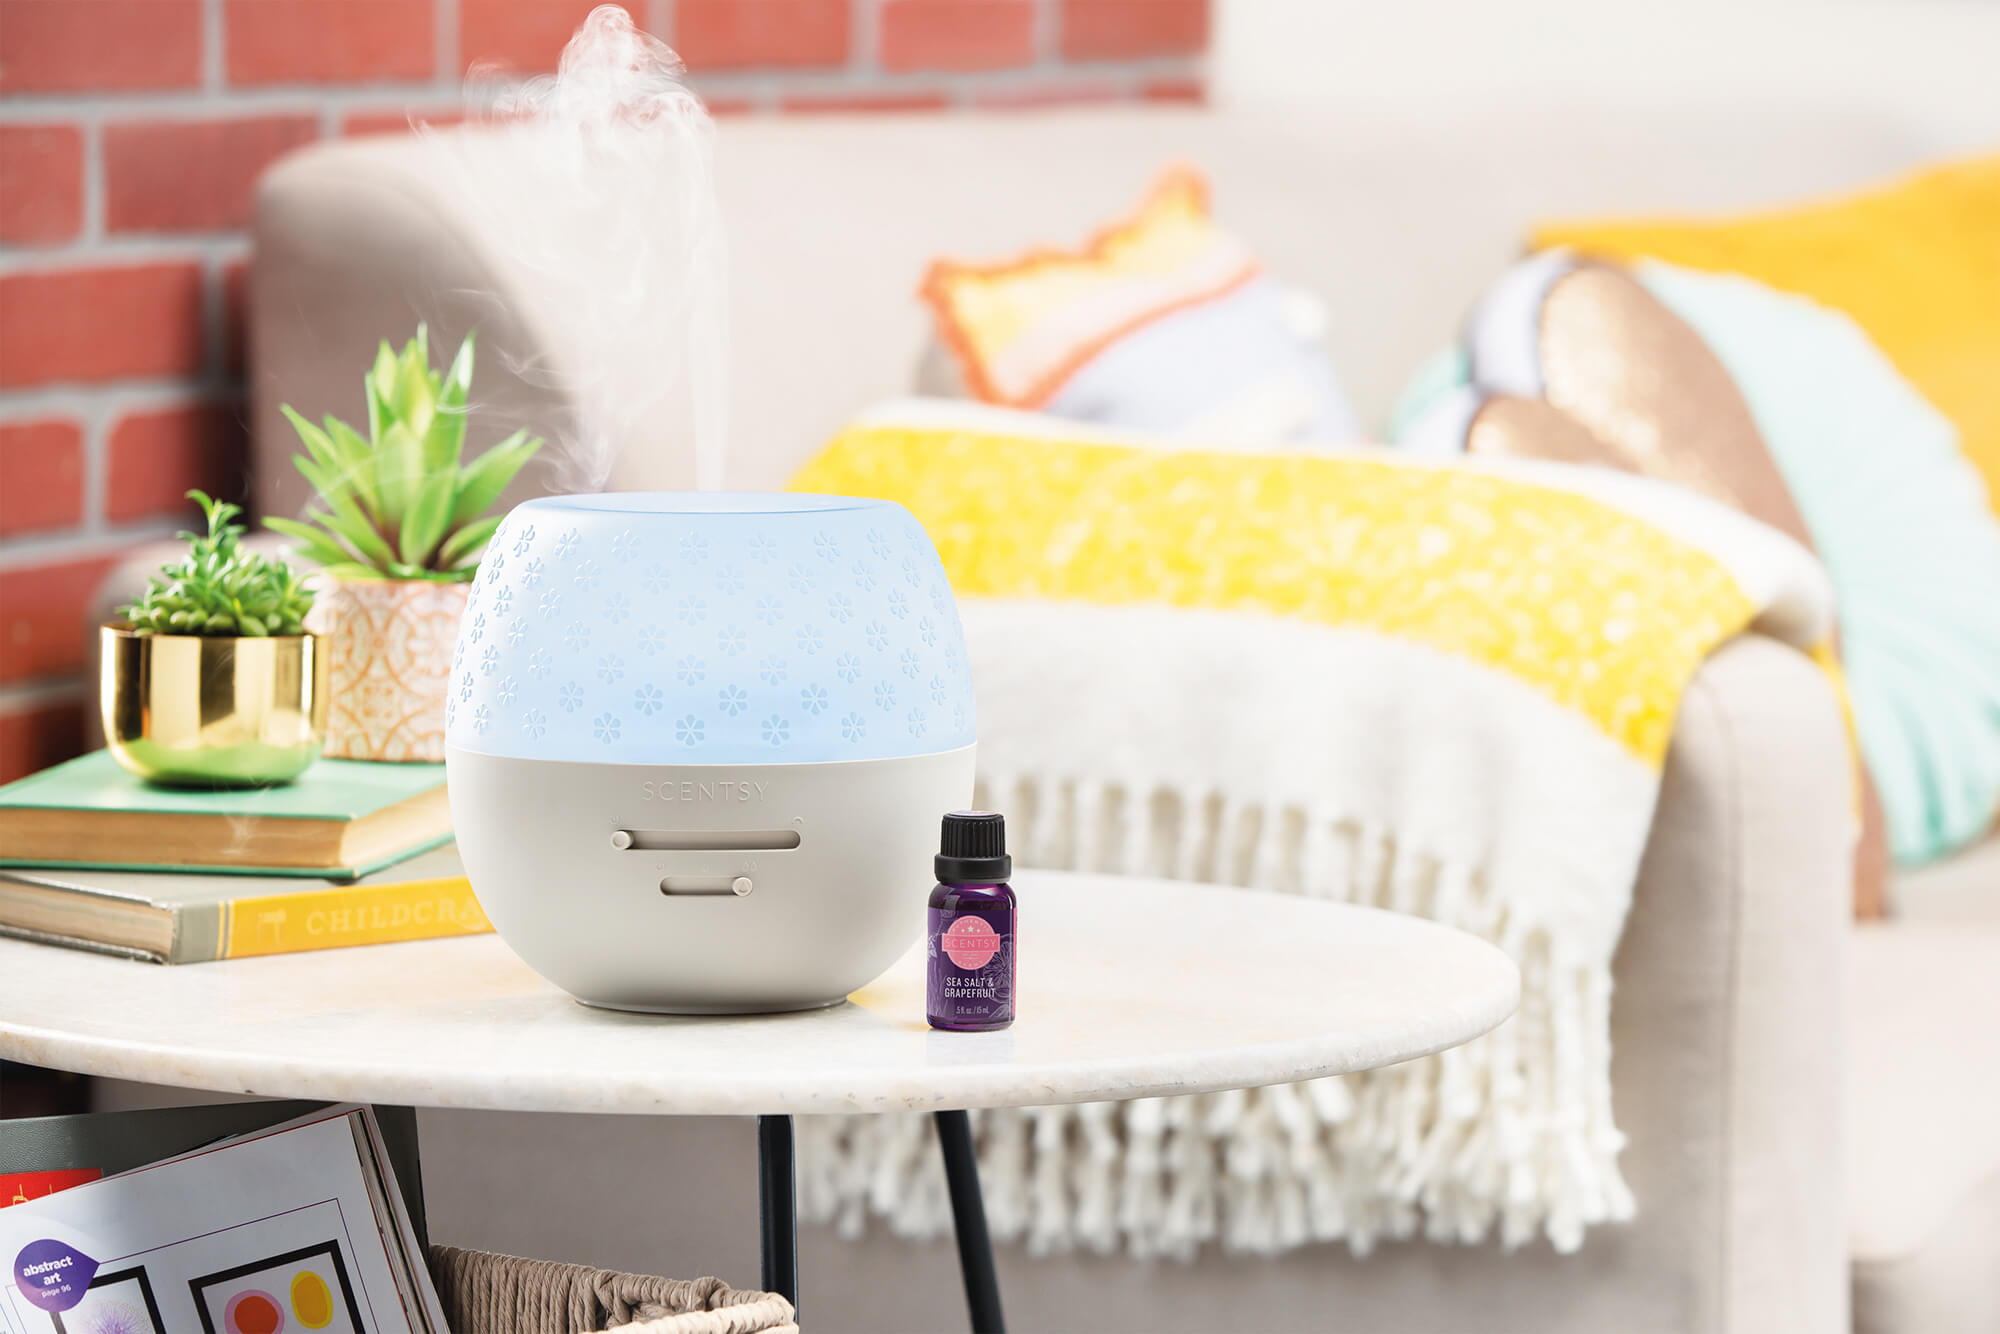 Everything you need to know about the new Deluxe Diffuser